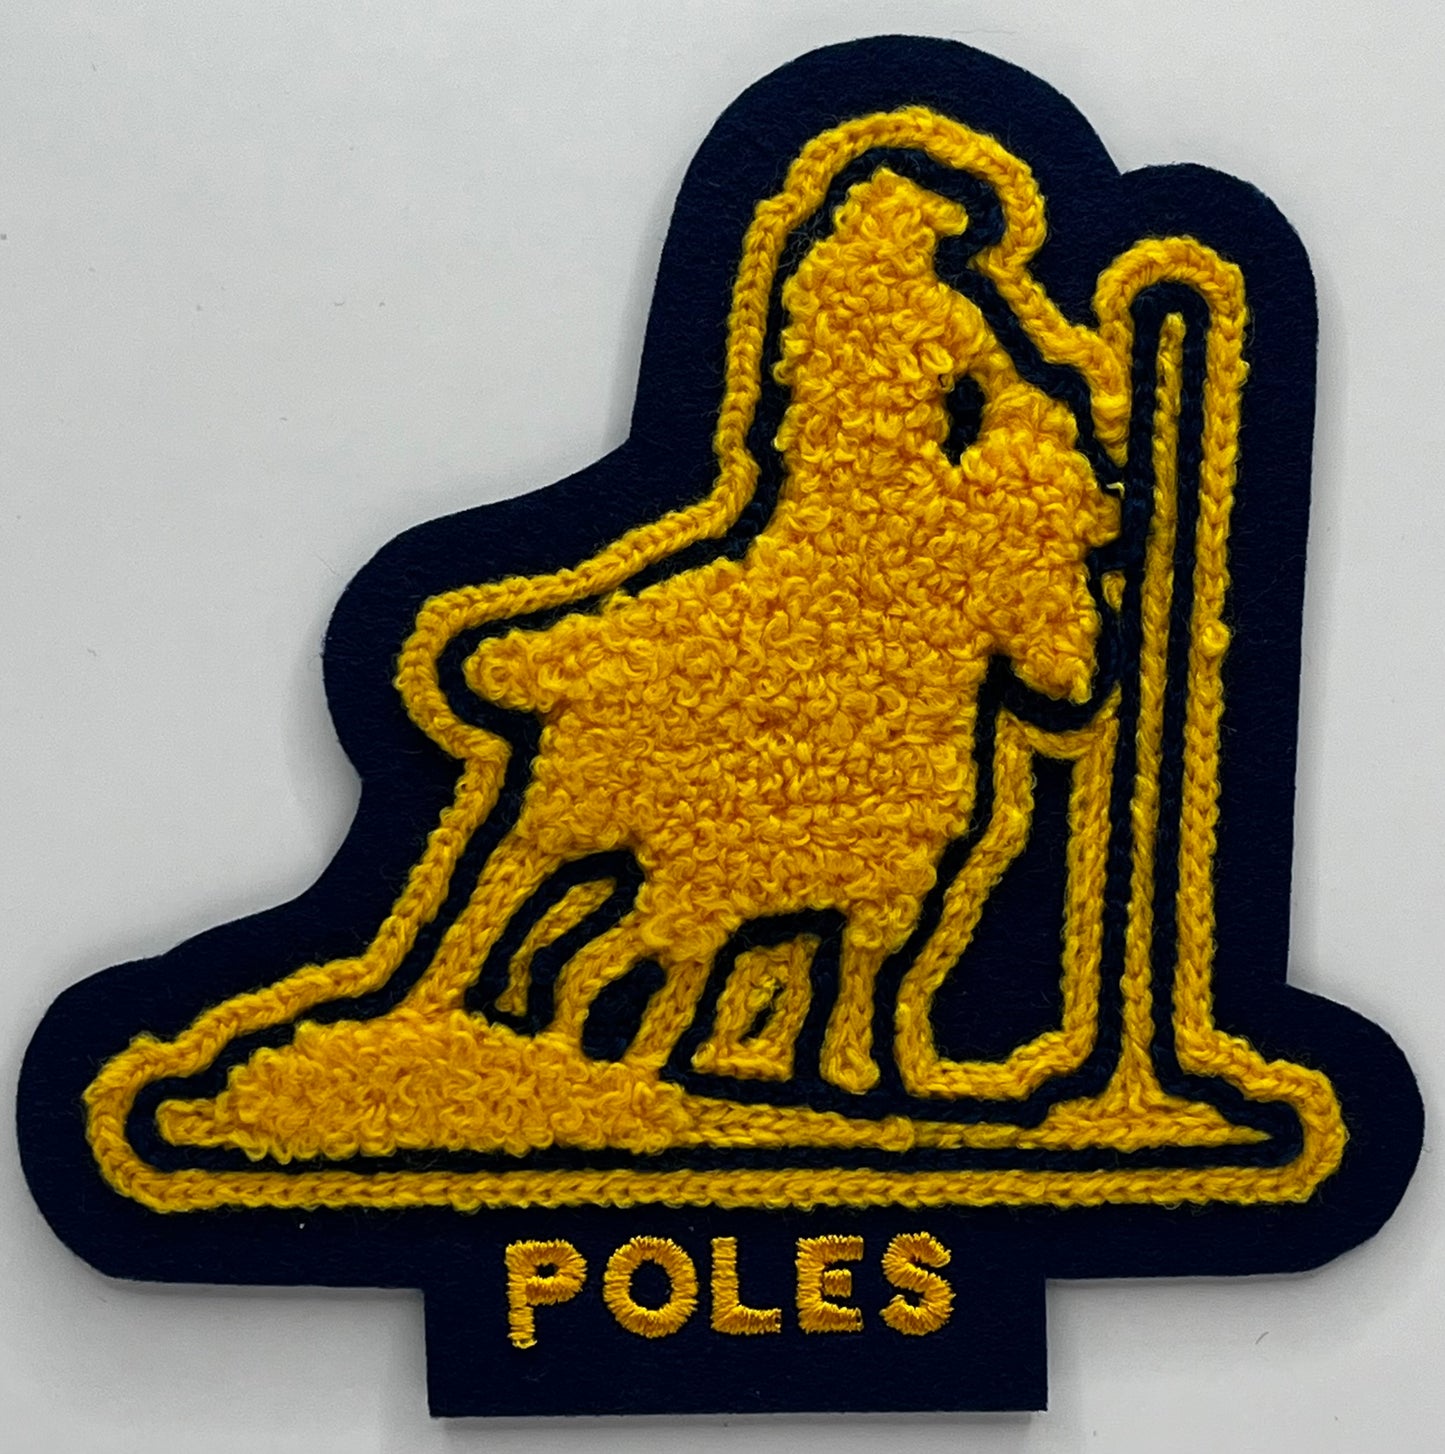 Poles Sleeve Patch